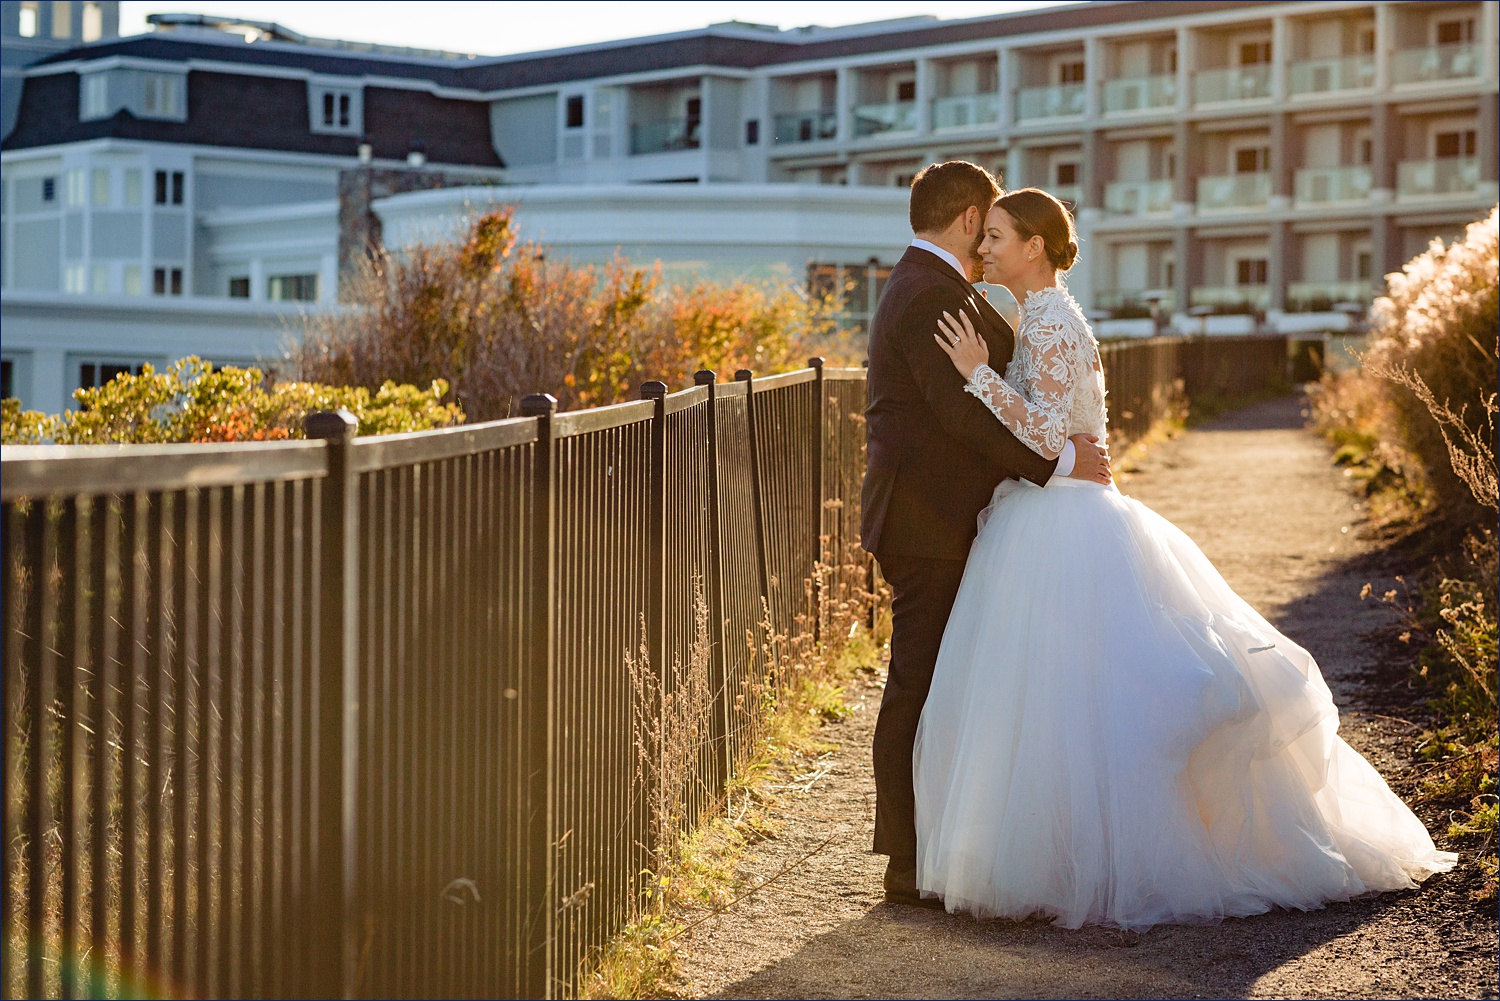 The sun sets at Cliff House over the Cape Neddick Maine building with the couple drenched in sun